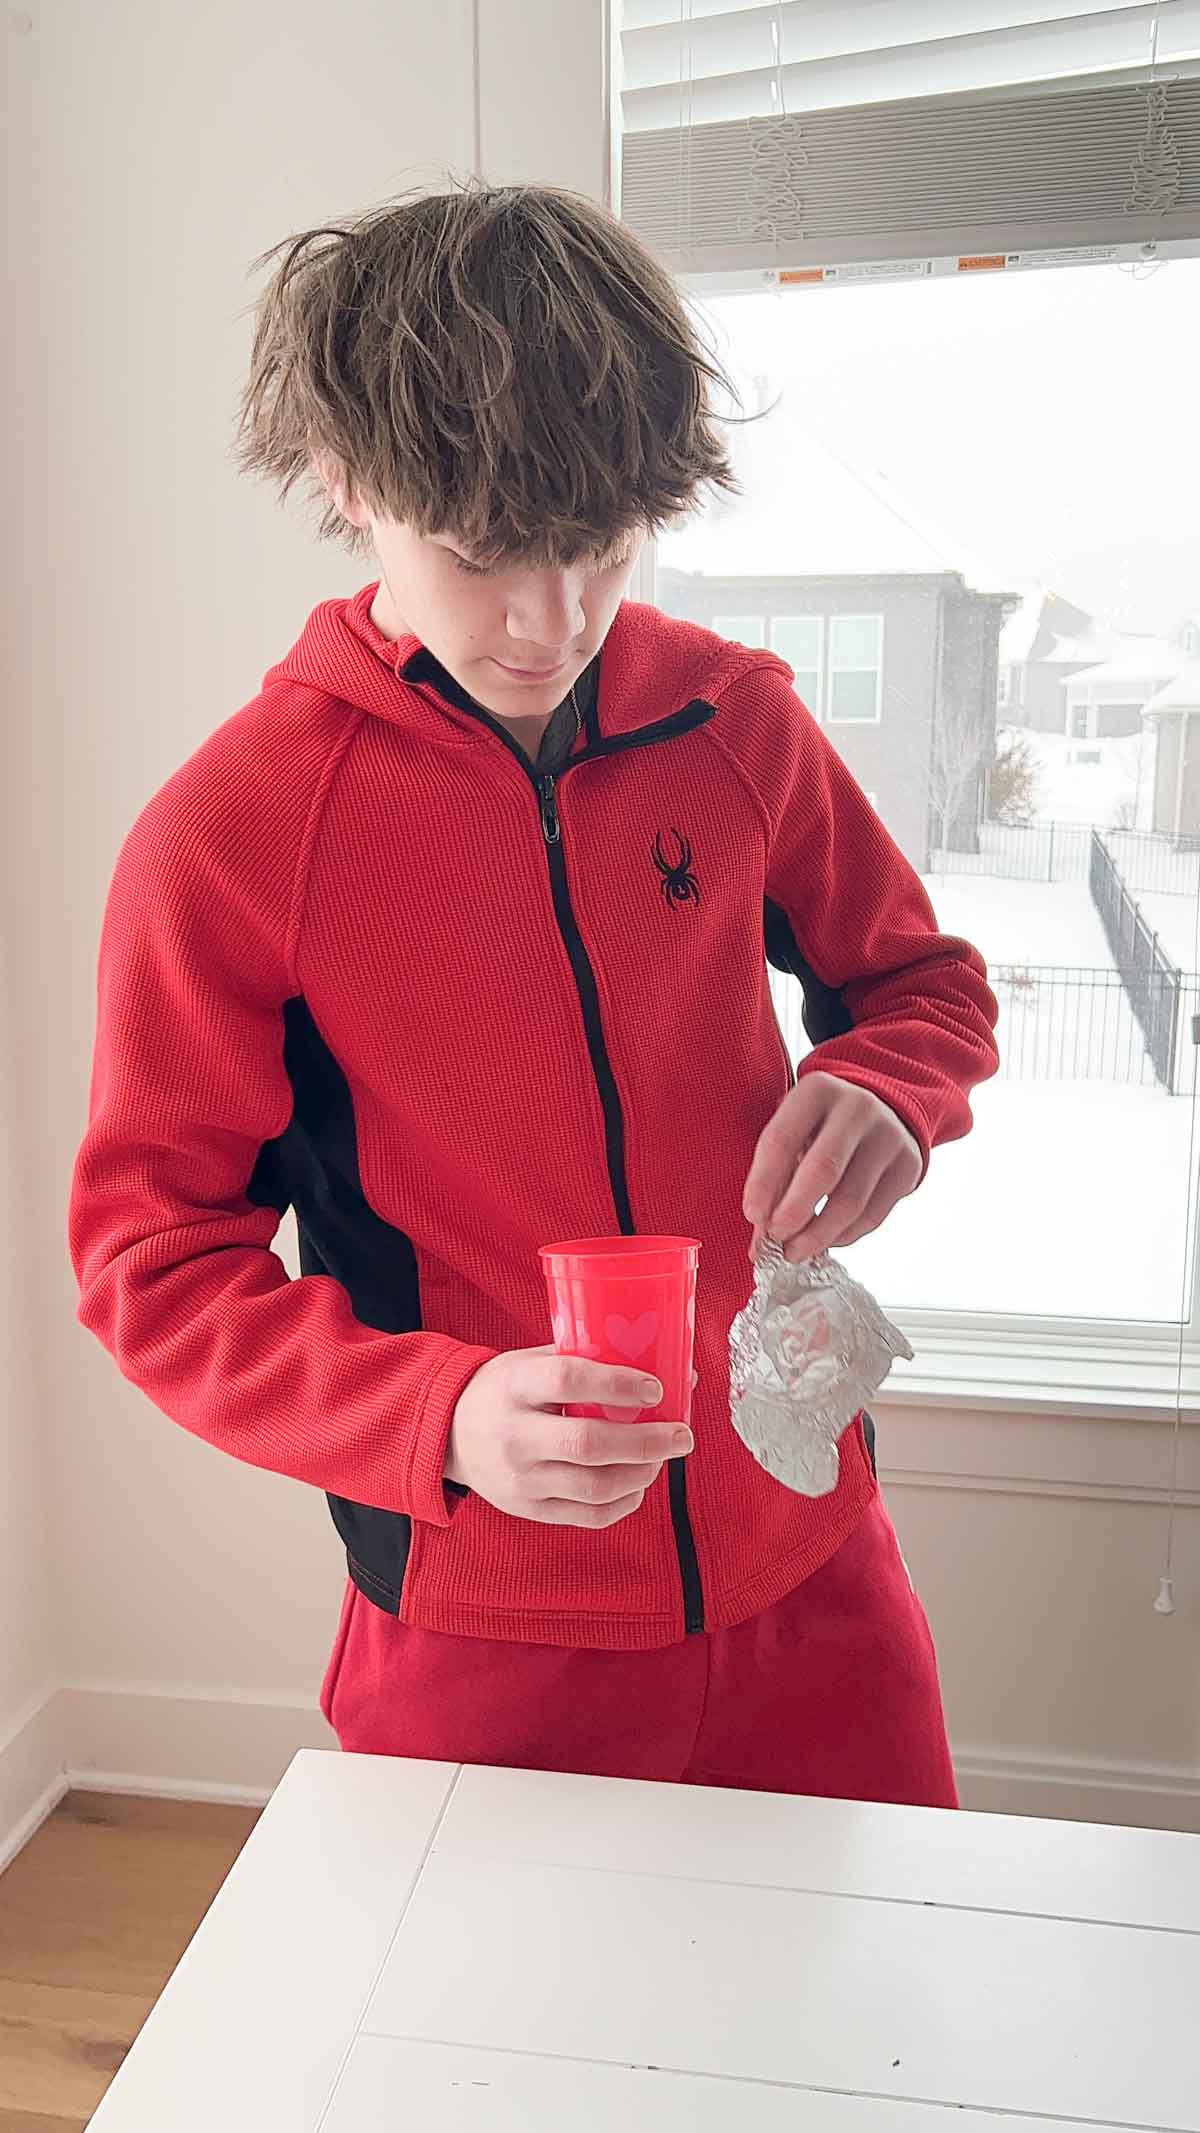 boy holding a cup standing next to a table